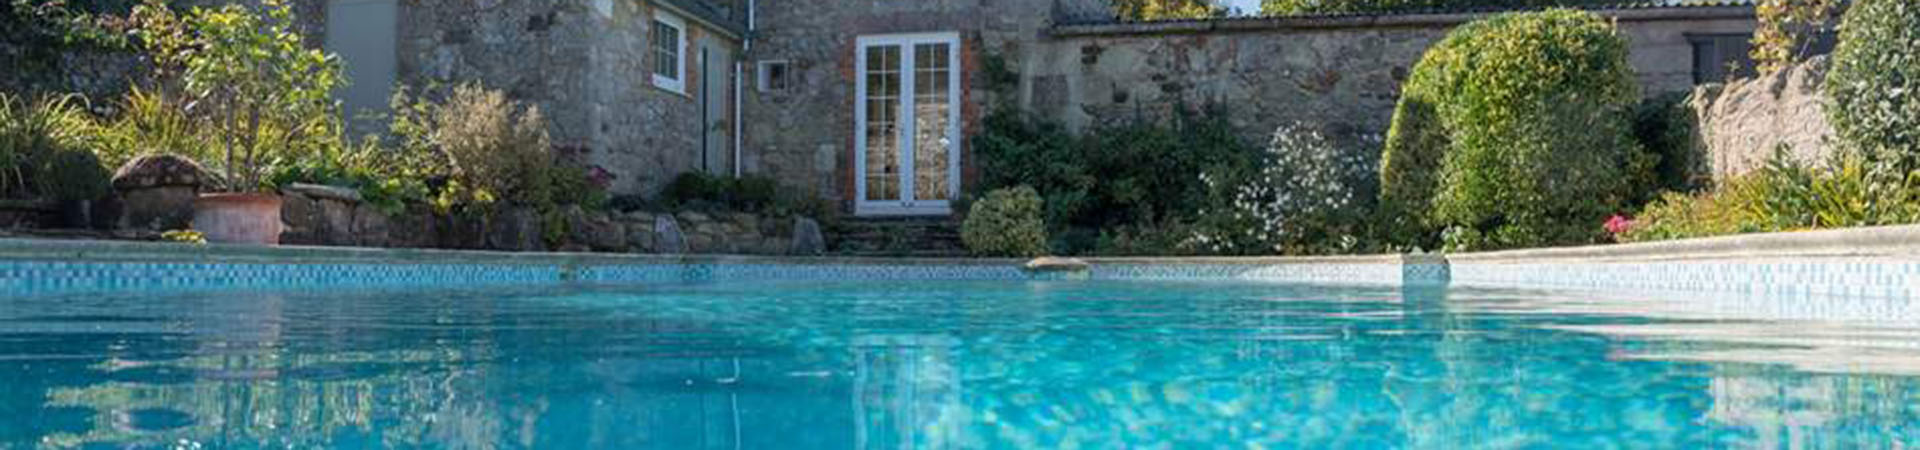 Holiday cottages with pools in East Devon